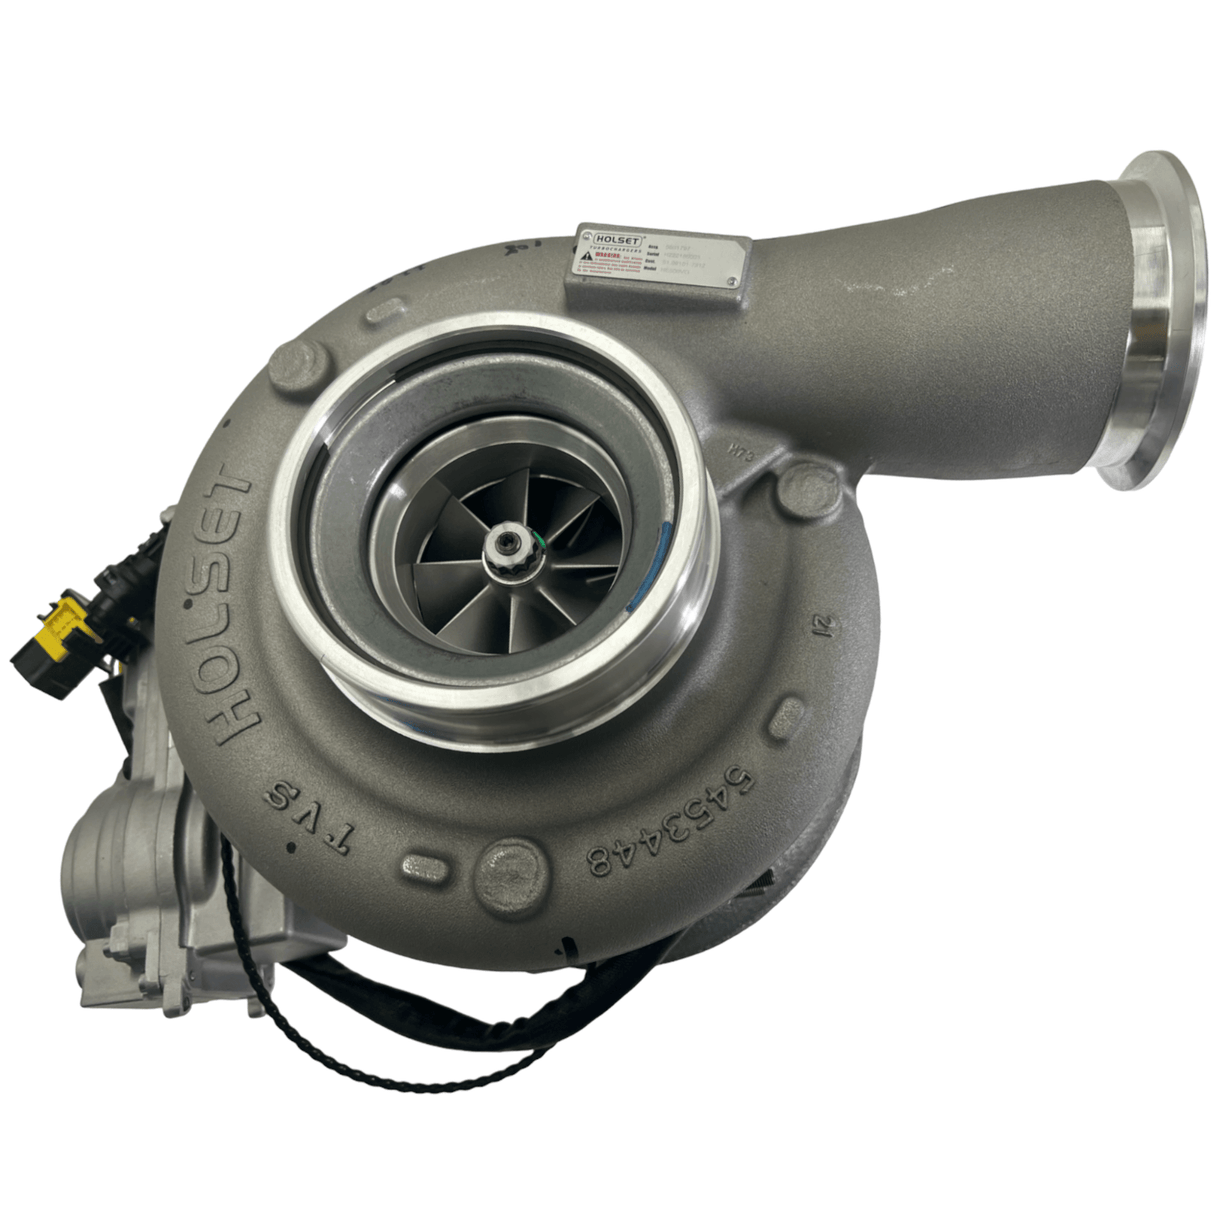 6394039 Genuine Holset Turbocharger HE500VG With Actuator